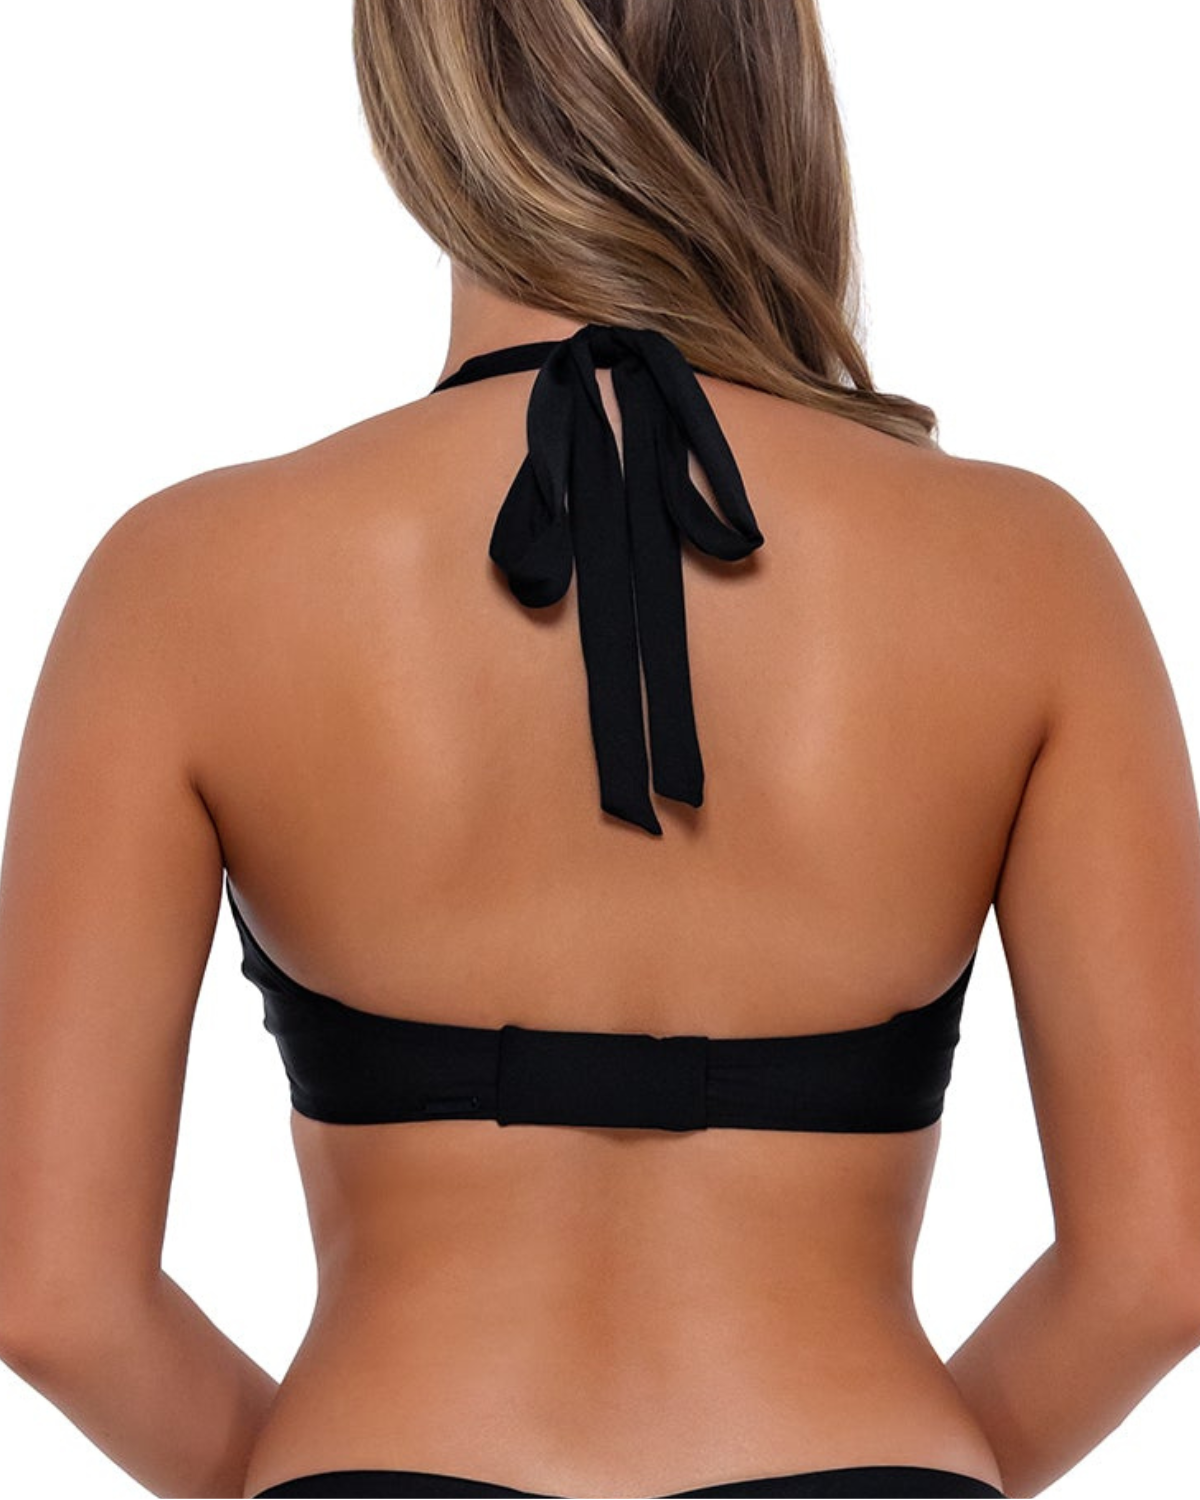 Model wearing a v-wire bikini top with multi-way styling in black. Model is wearing it with halter styling.